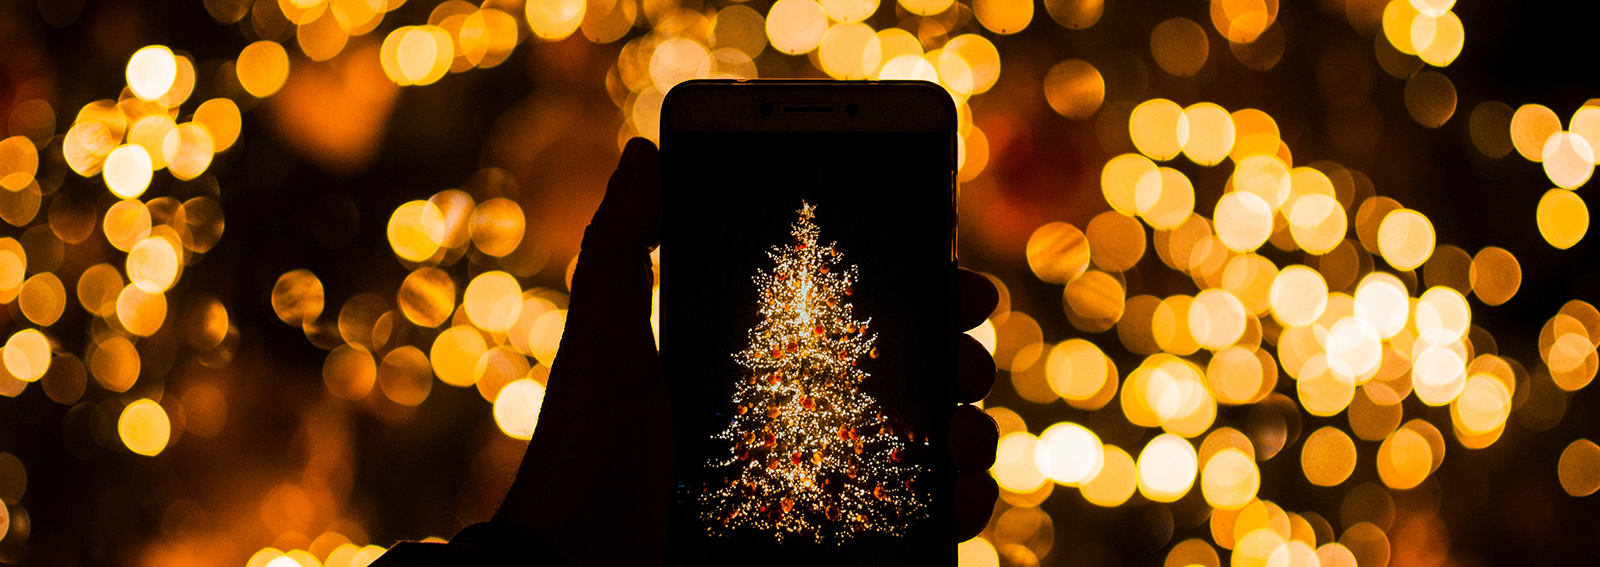 Close-Up Of Person Photographing Illuminated Christmas Tree Using Smart Phone